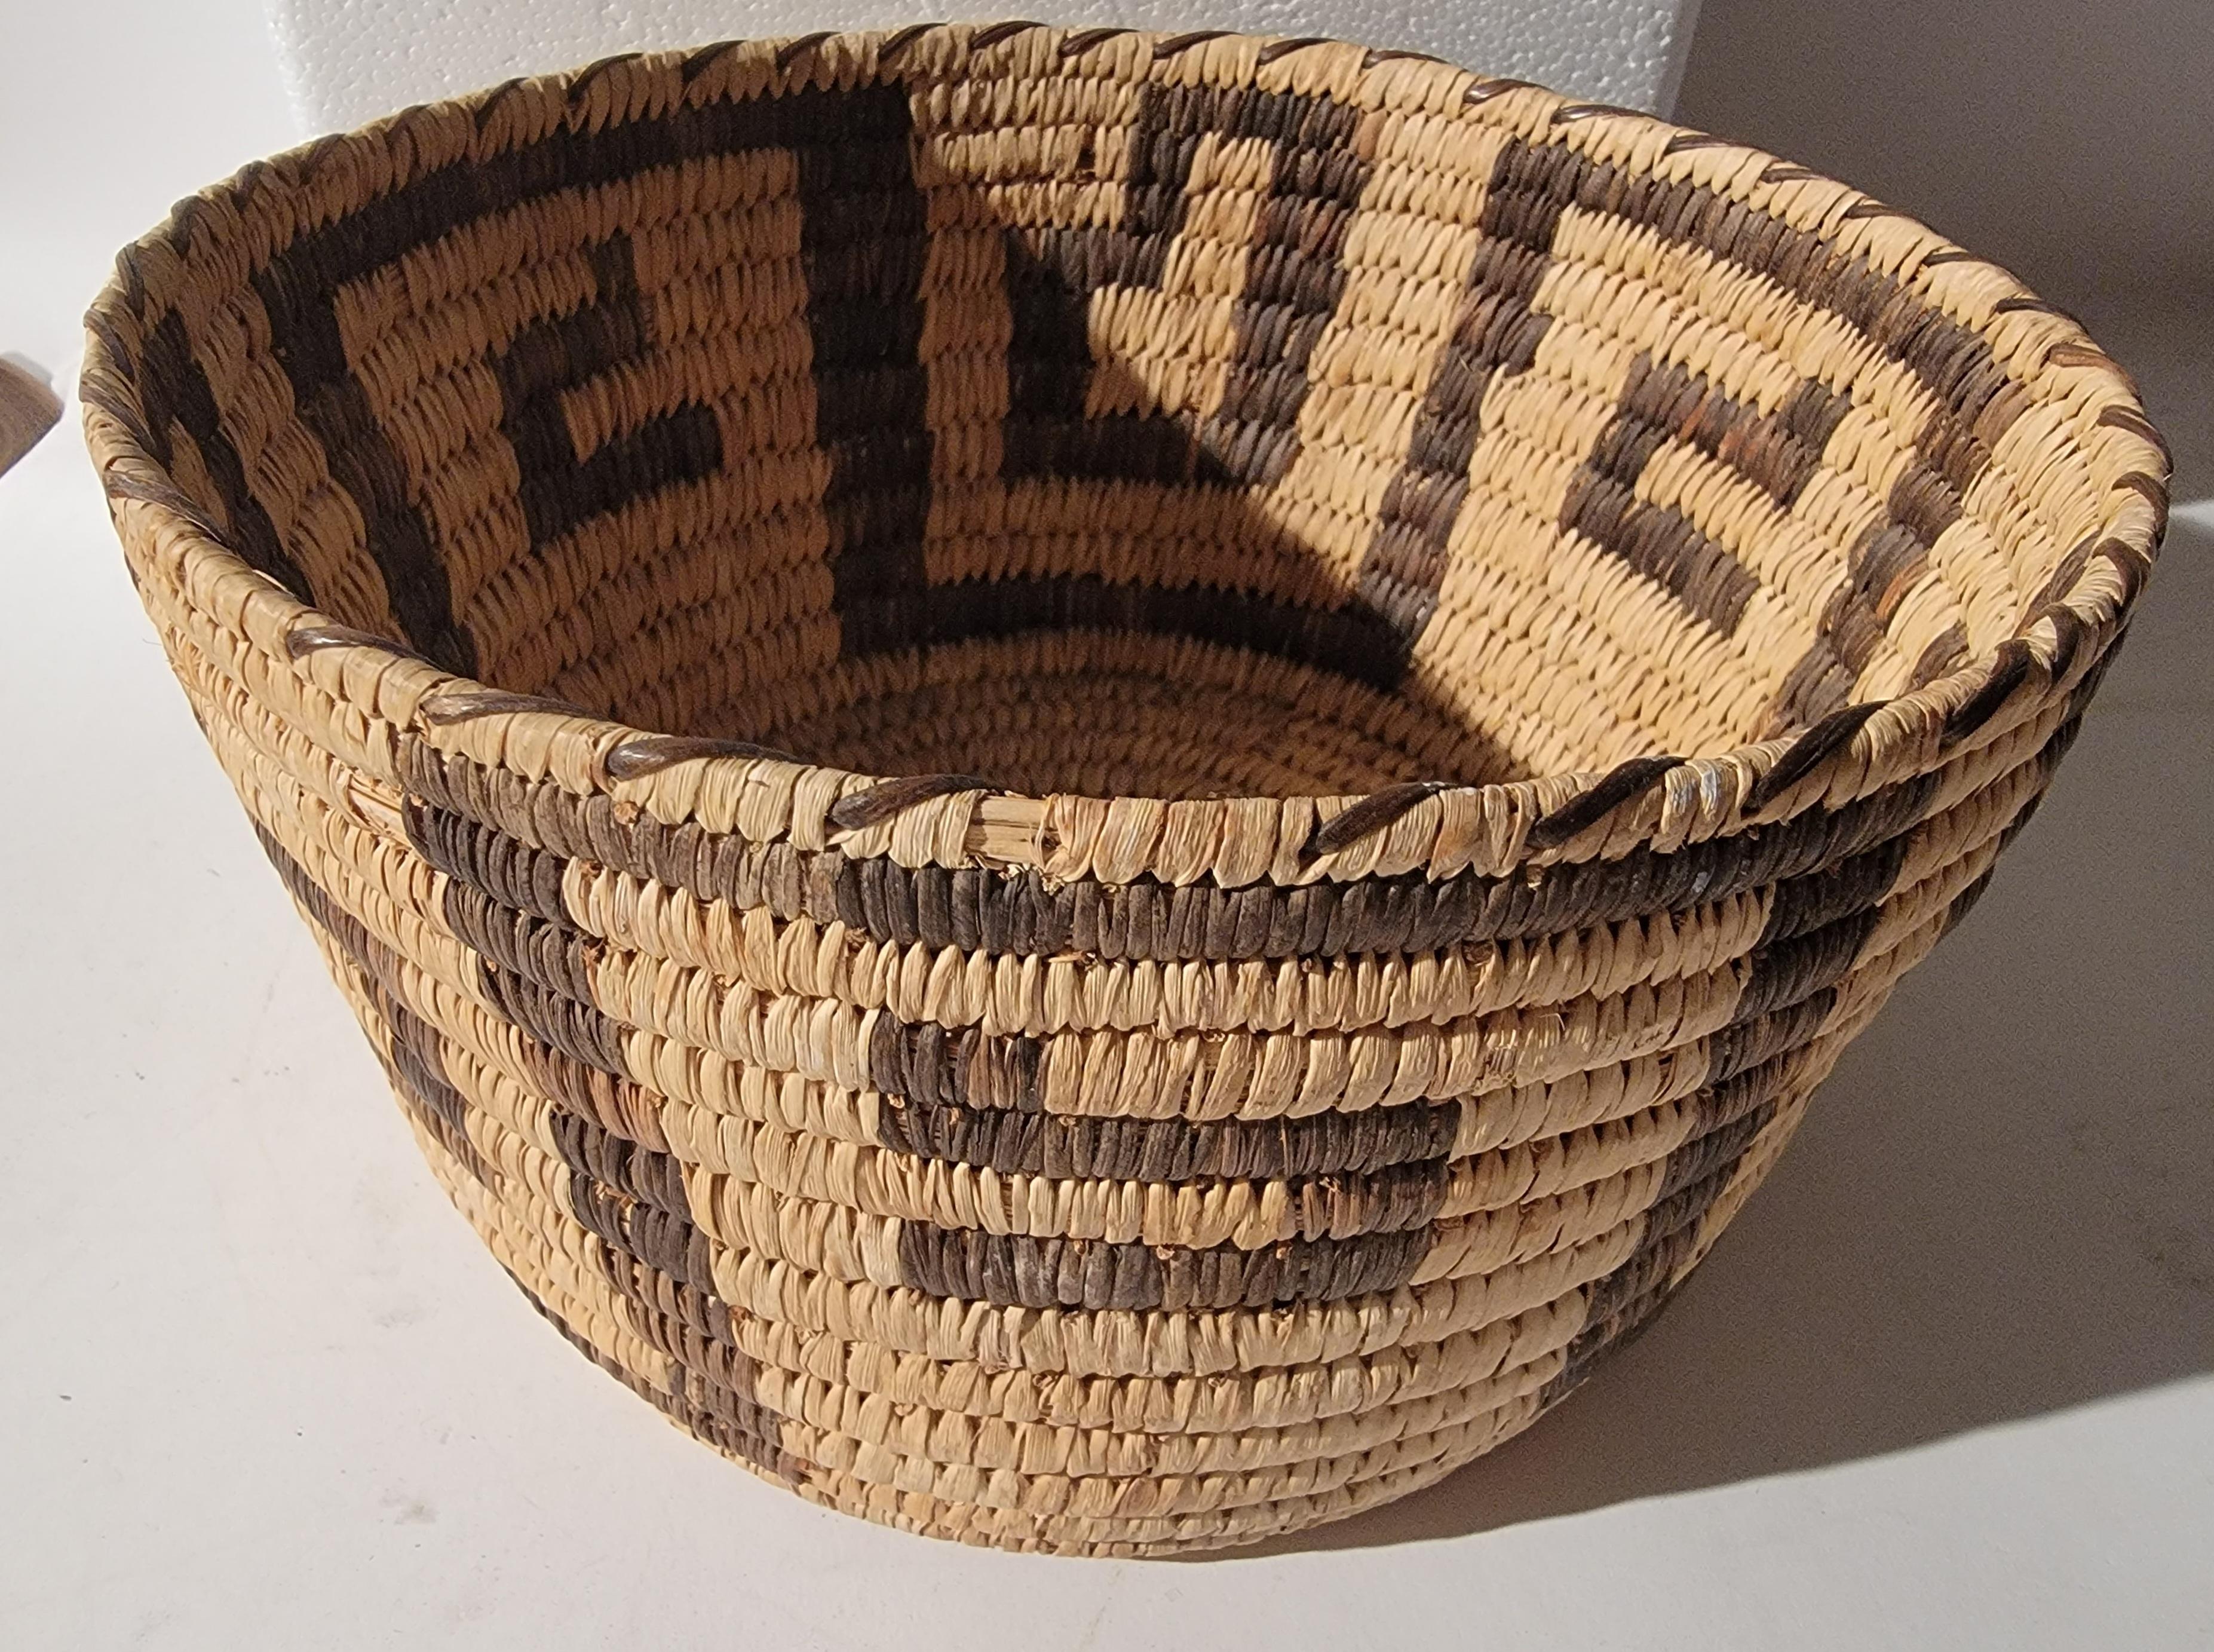 Hemp Collection of Geometric Pima Indian Baskets -4 For Sale